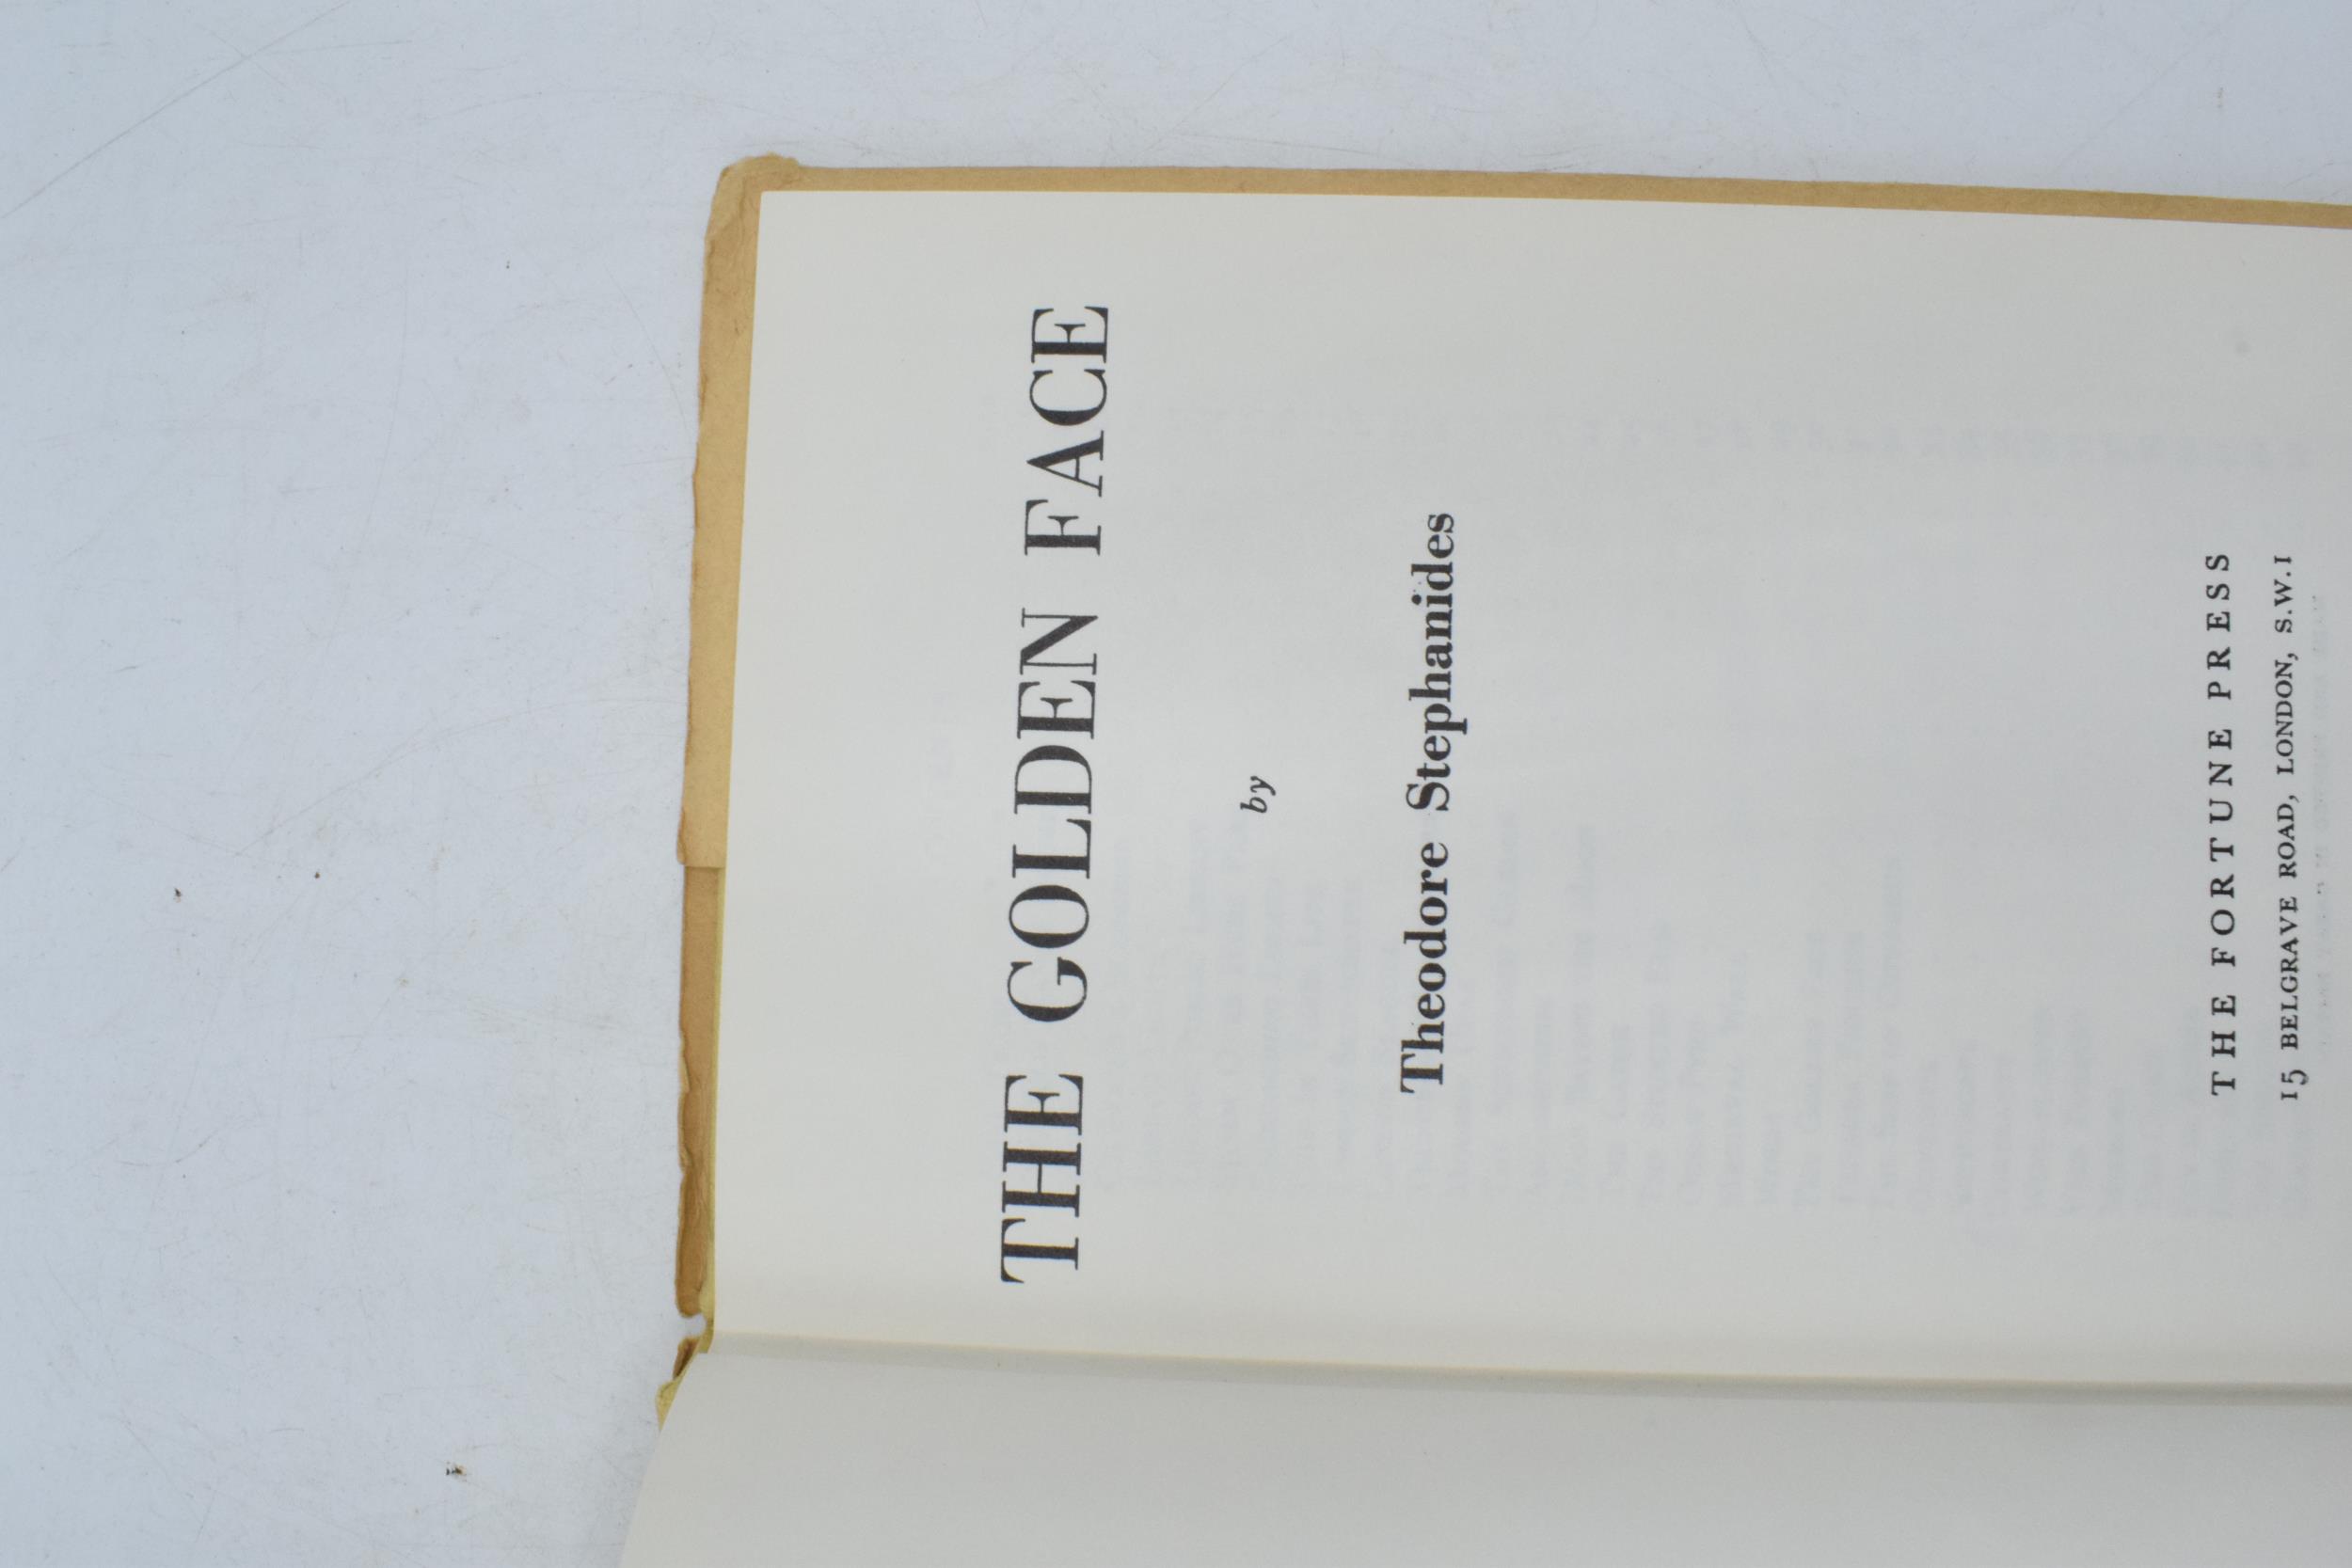 'The Golden Face' 1965 and 'Cities of the Mind' 1969 by Theodore Syephanides, both first editions - Image 7 of 8